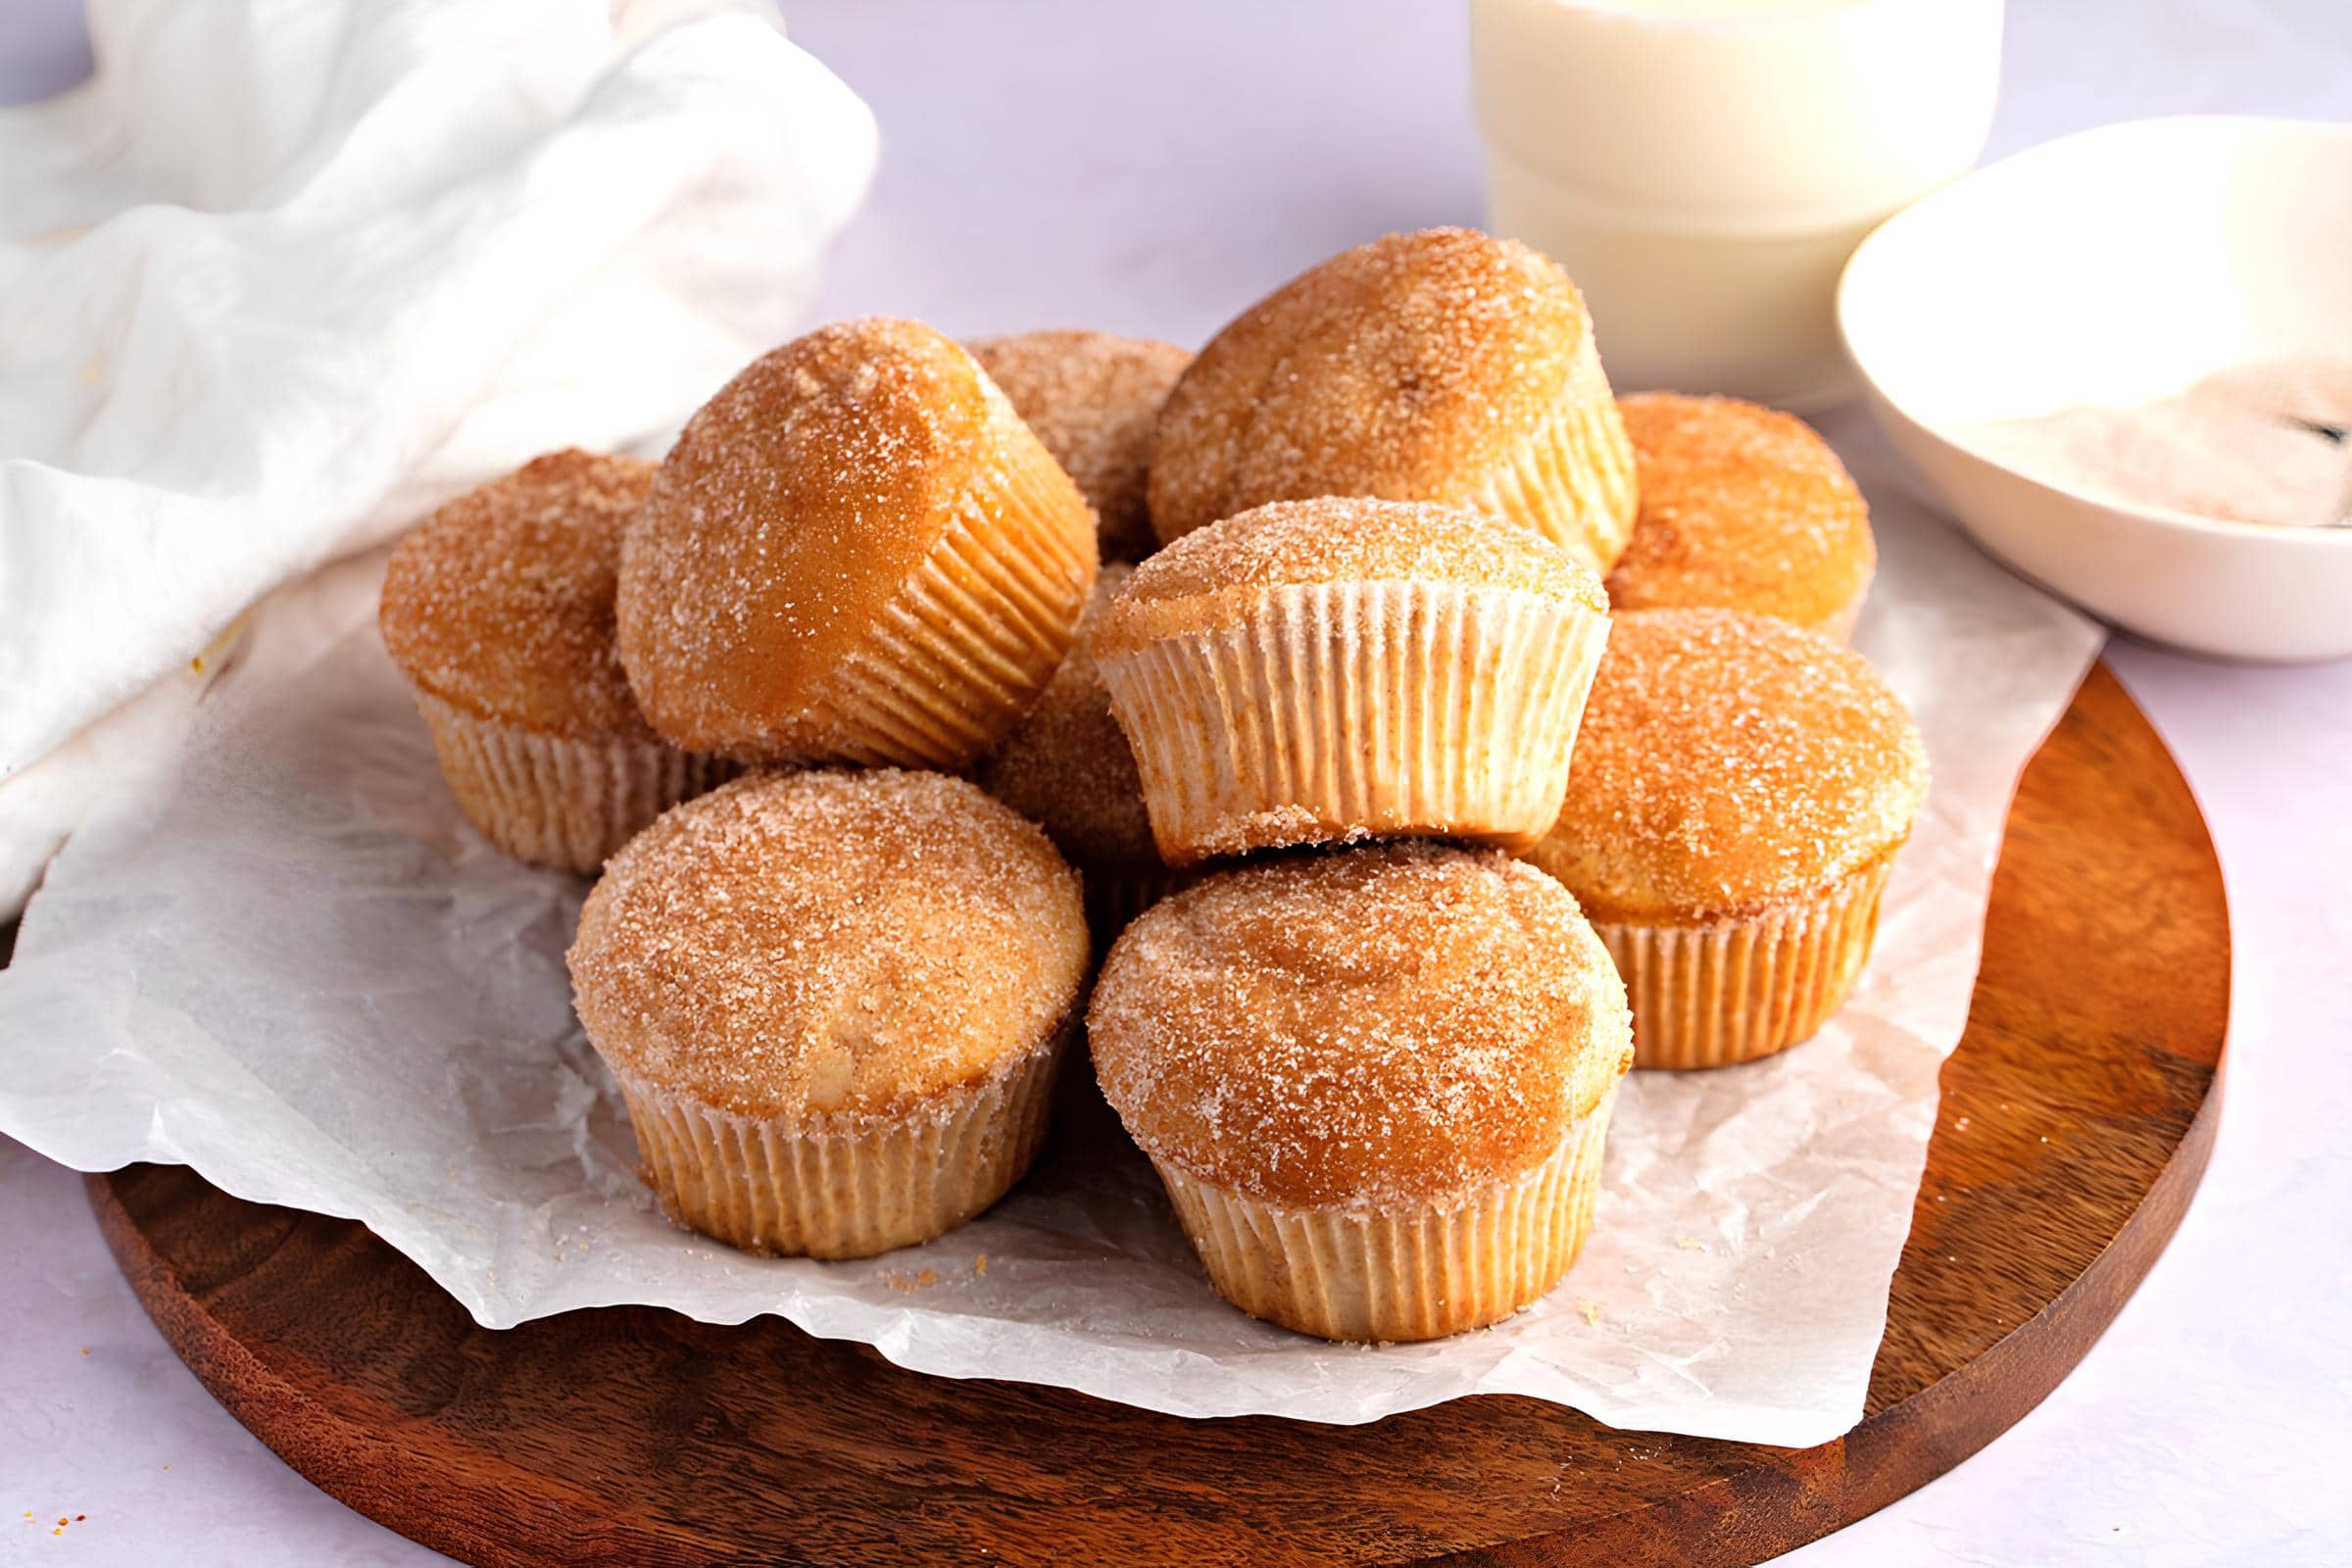 A Pile of Muffins on a Table Served with Milk